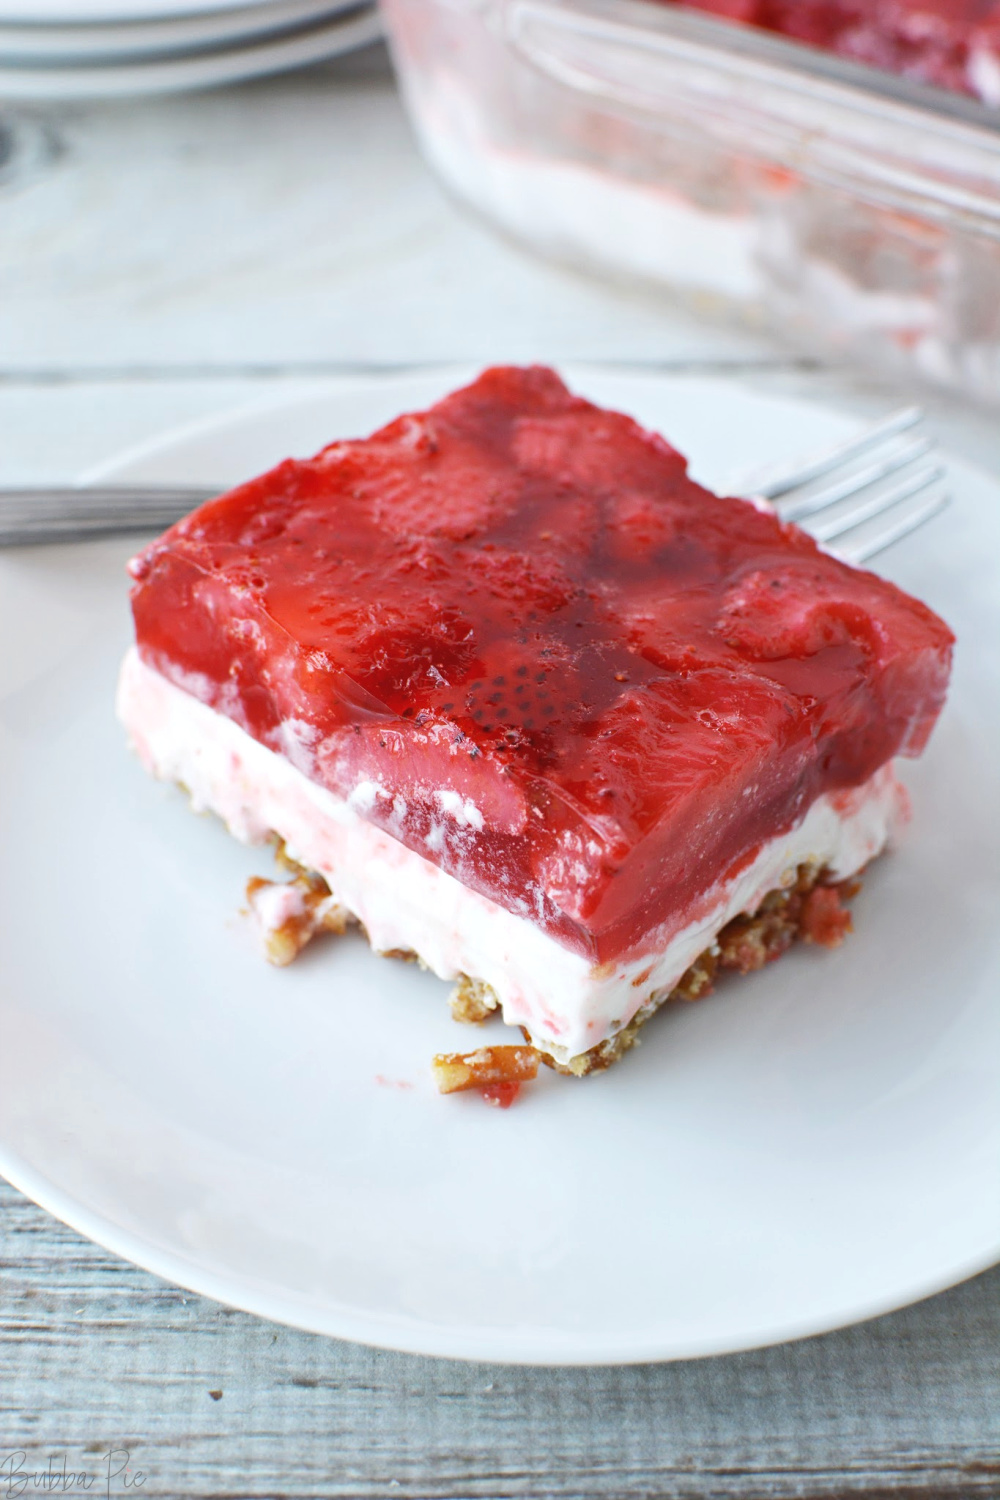 Strawberry Pretzel Salad sitting on a plate ready to be served for dessert.